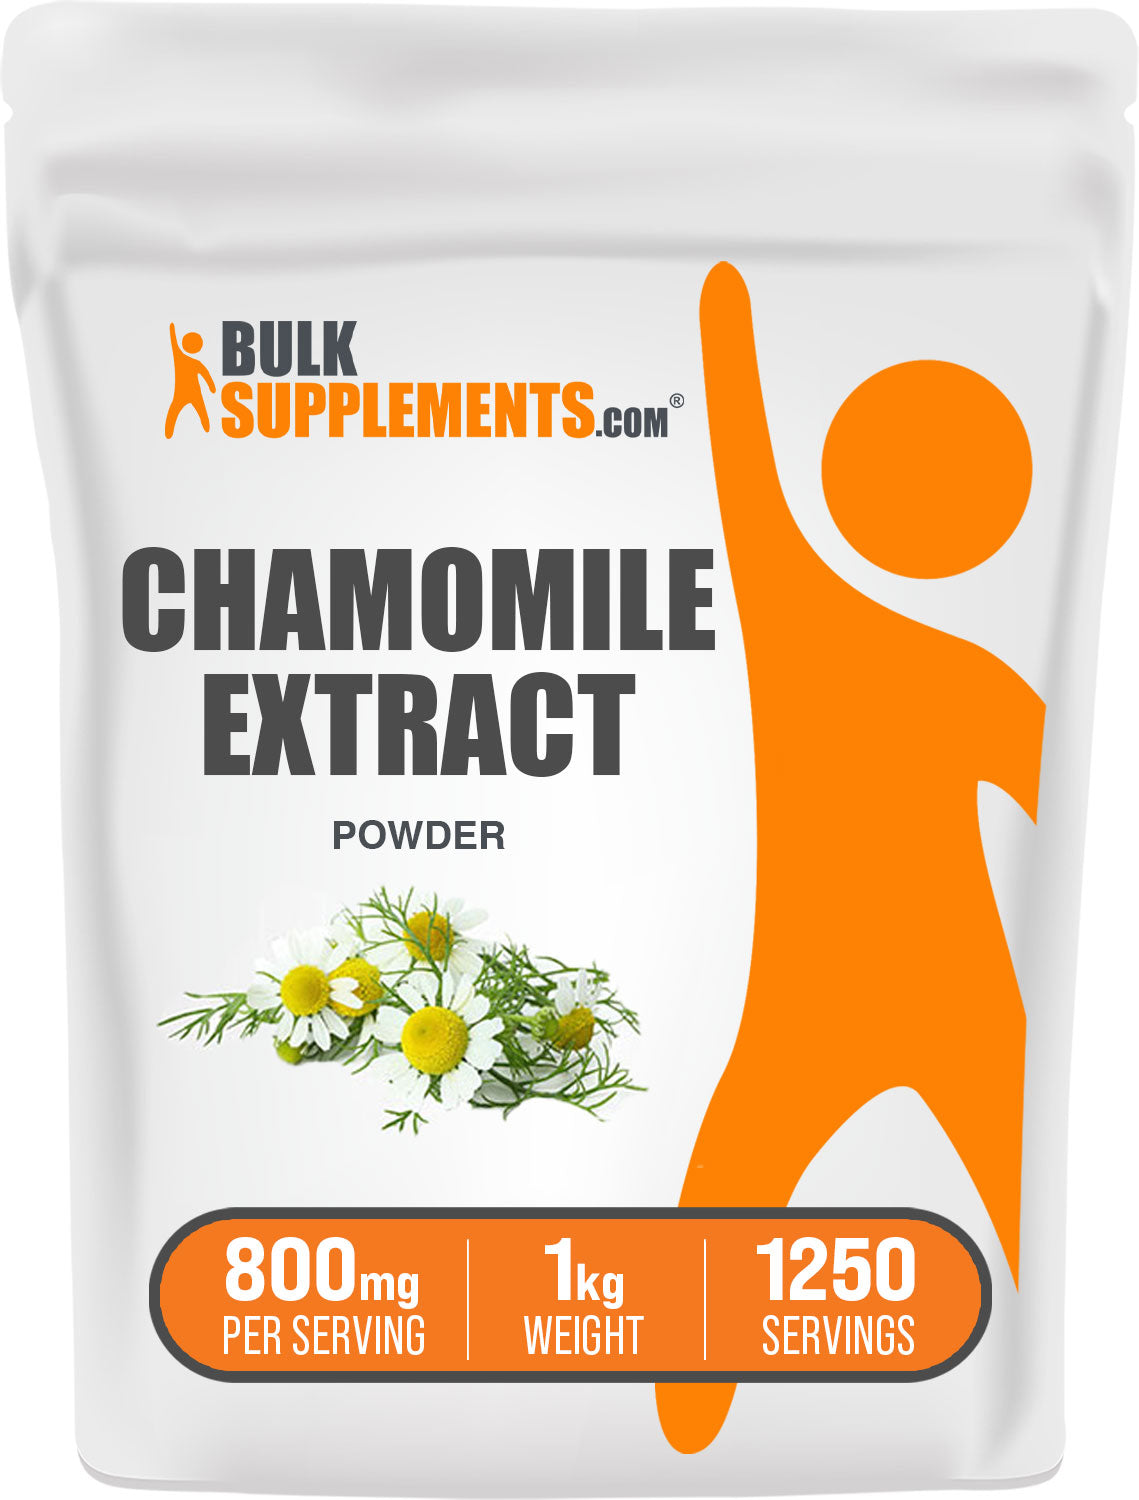 1kg of chamomile extract